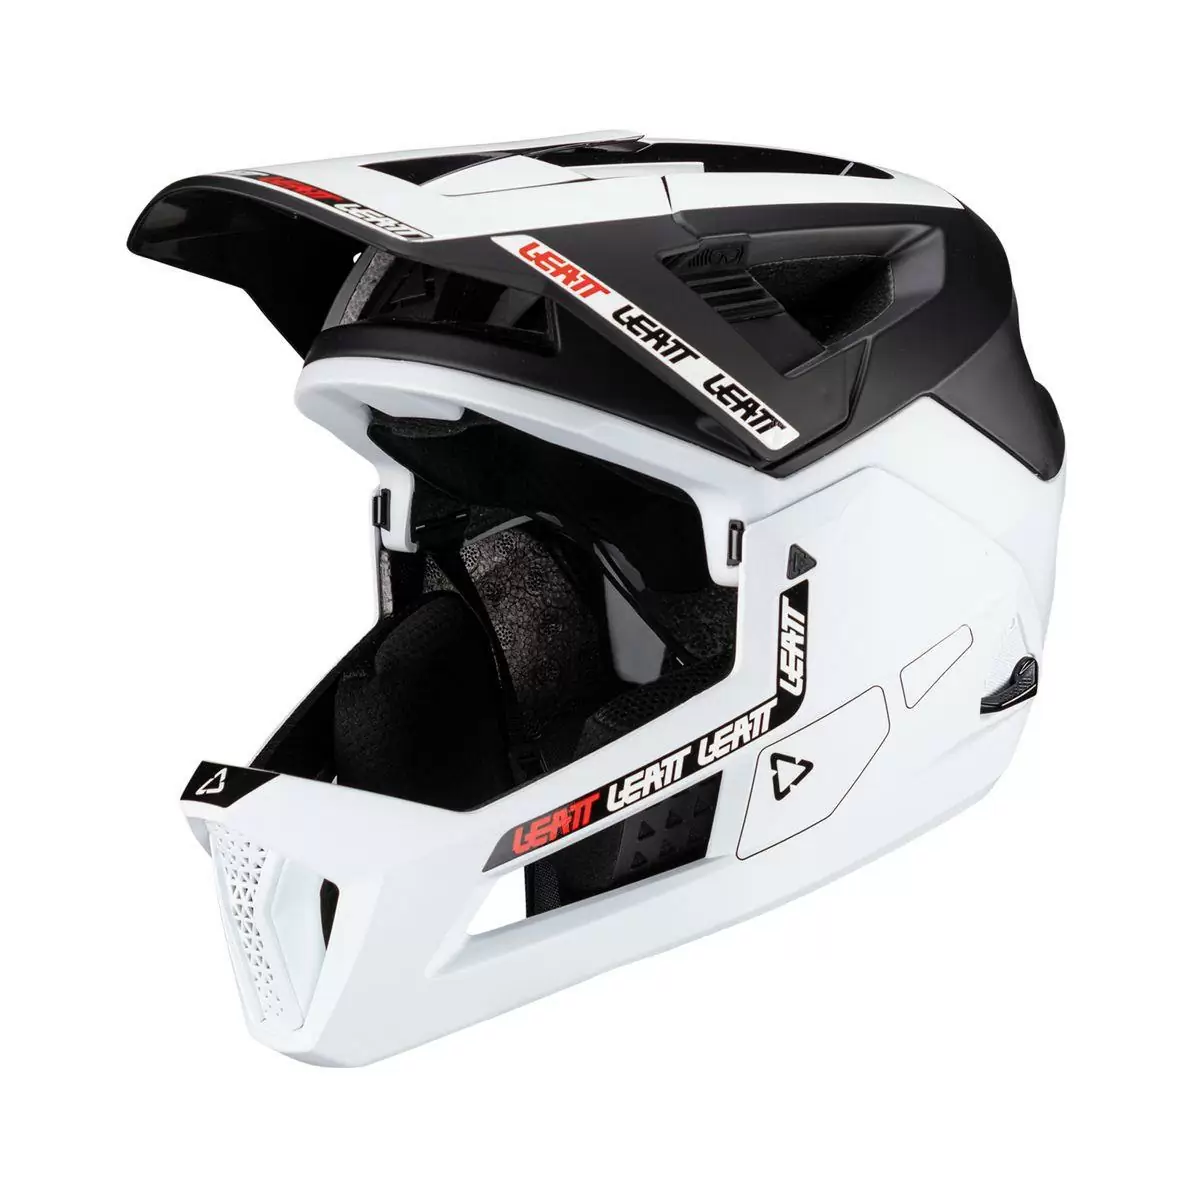 MTB Enduro 4.0 Helmet With Removable Chin Guard White/Black Size S (5